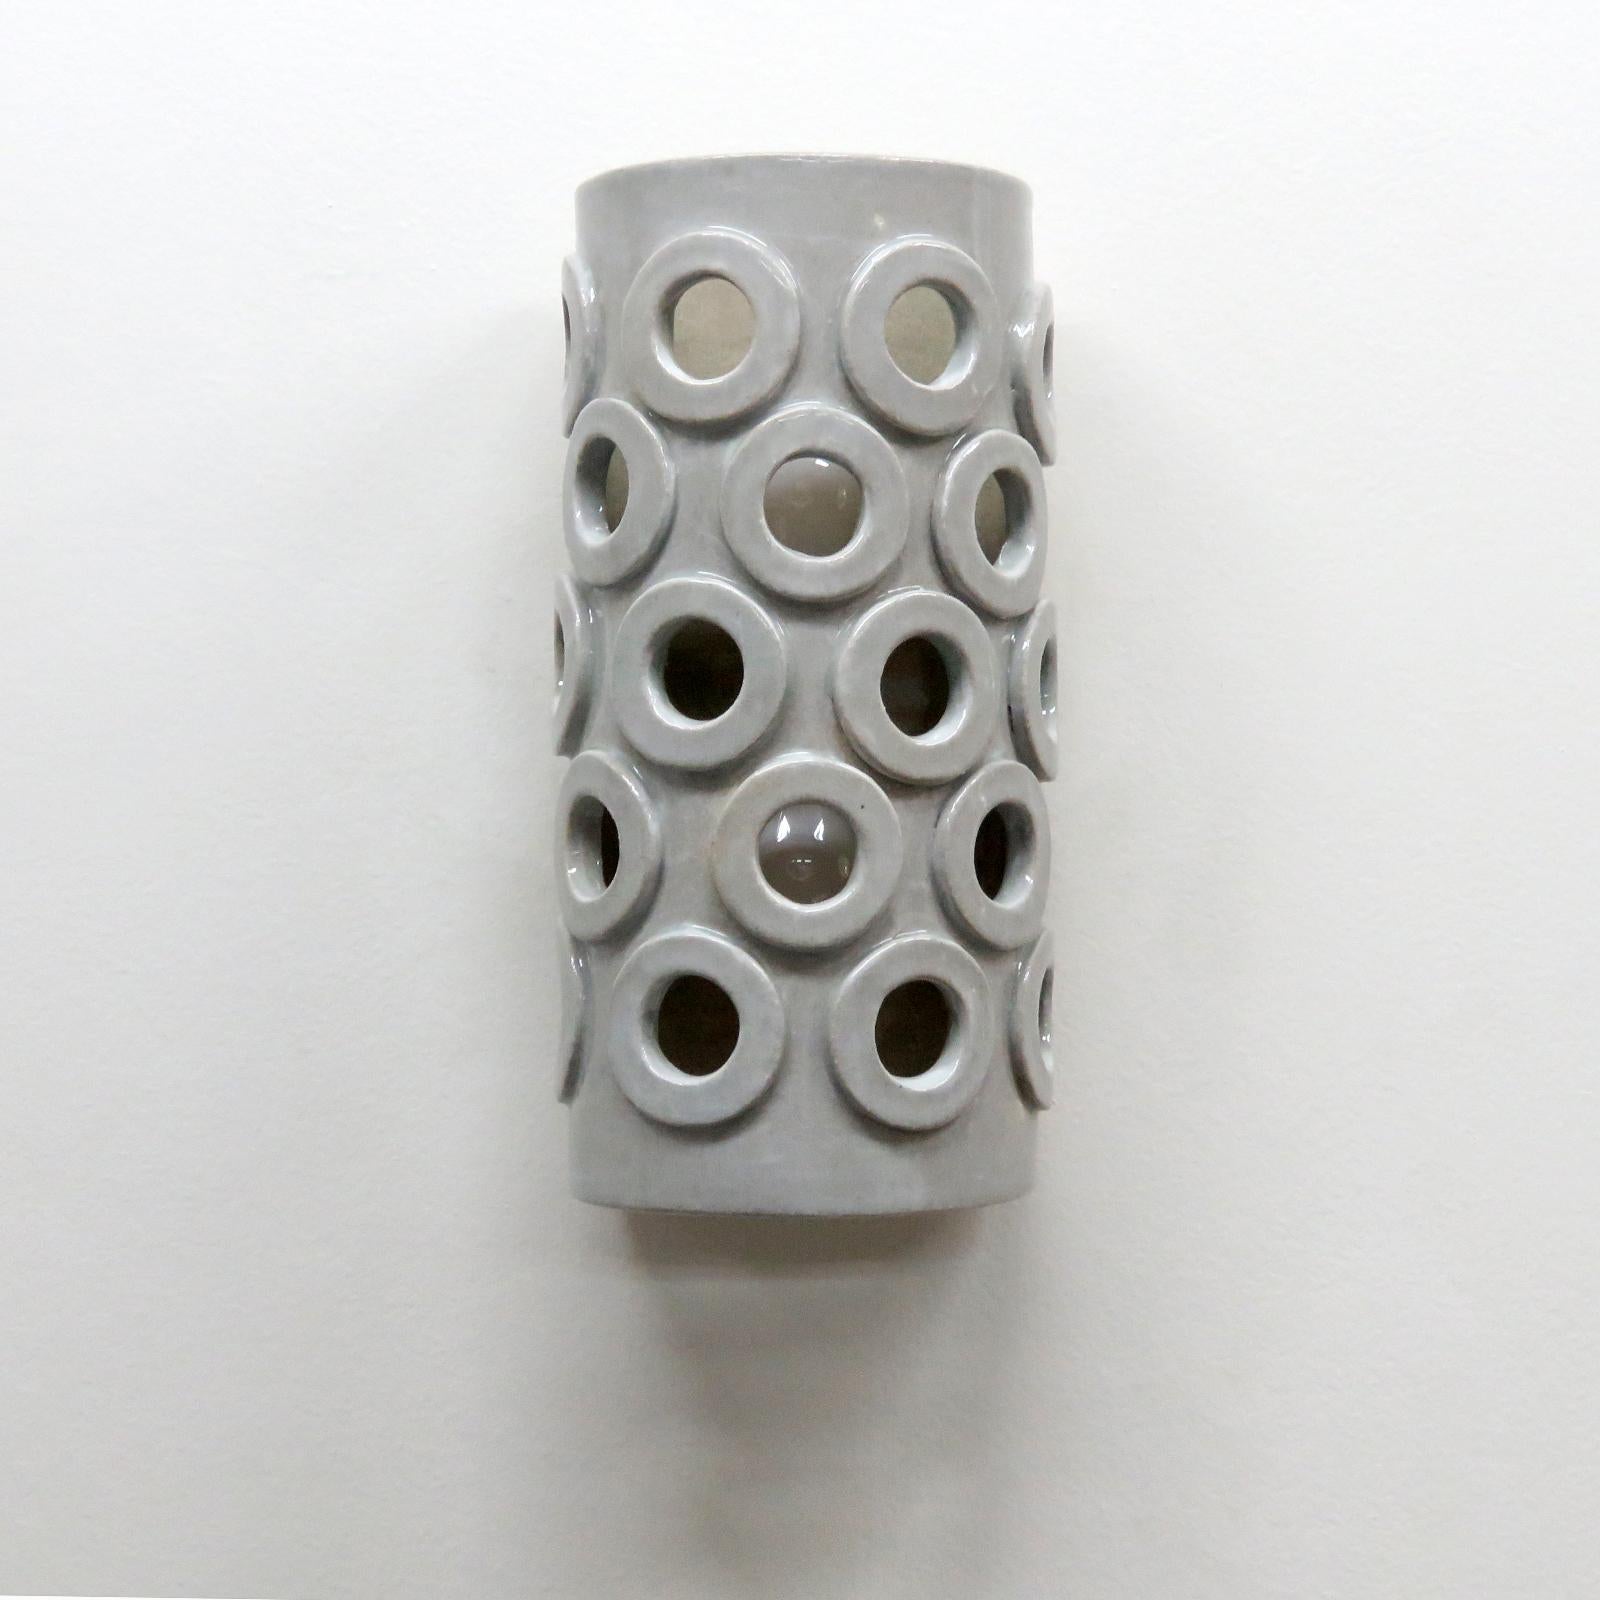 Stunning tall semi-cylindrical ceramic wall light No.51, designed and handcrafted by Los Angeles based ceramicist Heather Levine. High fired stoneware with grey/white glaze body with decorative perforations to expose light in patterns on nearby